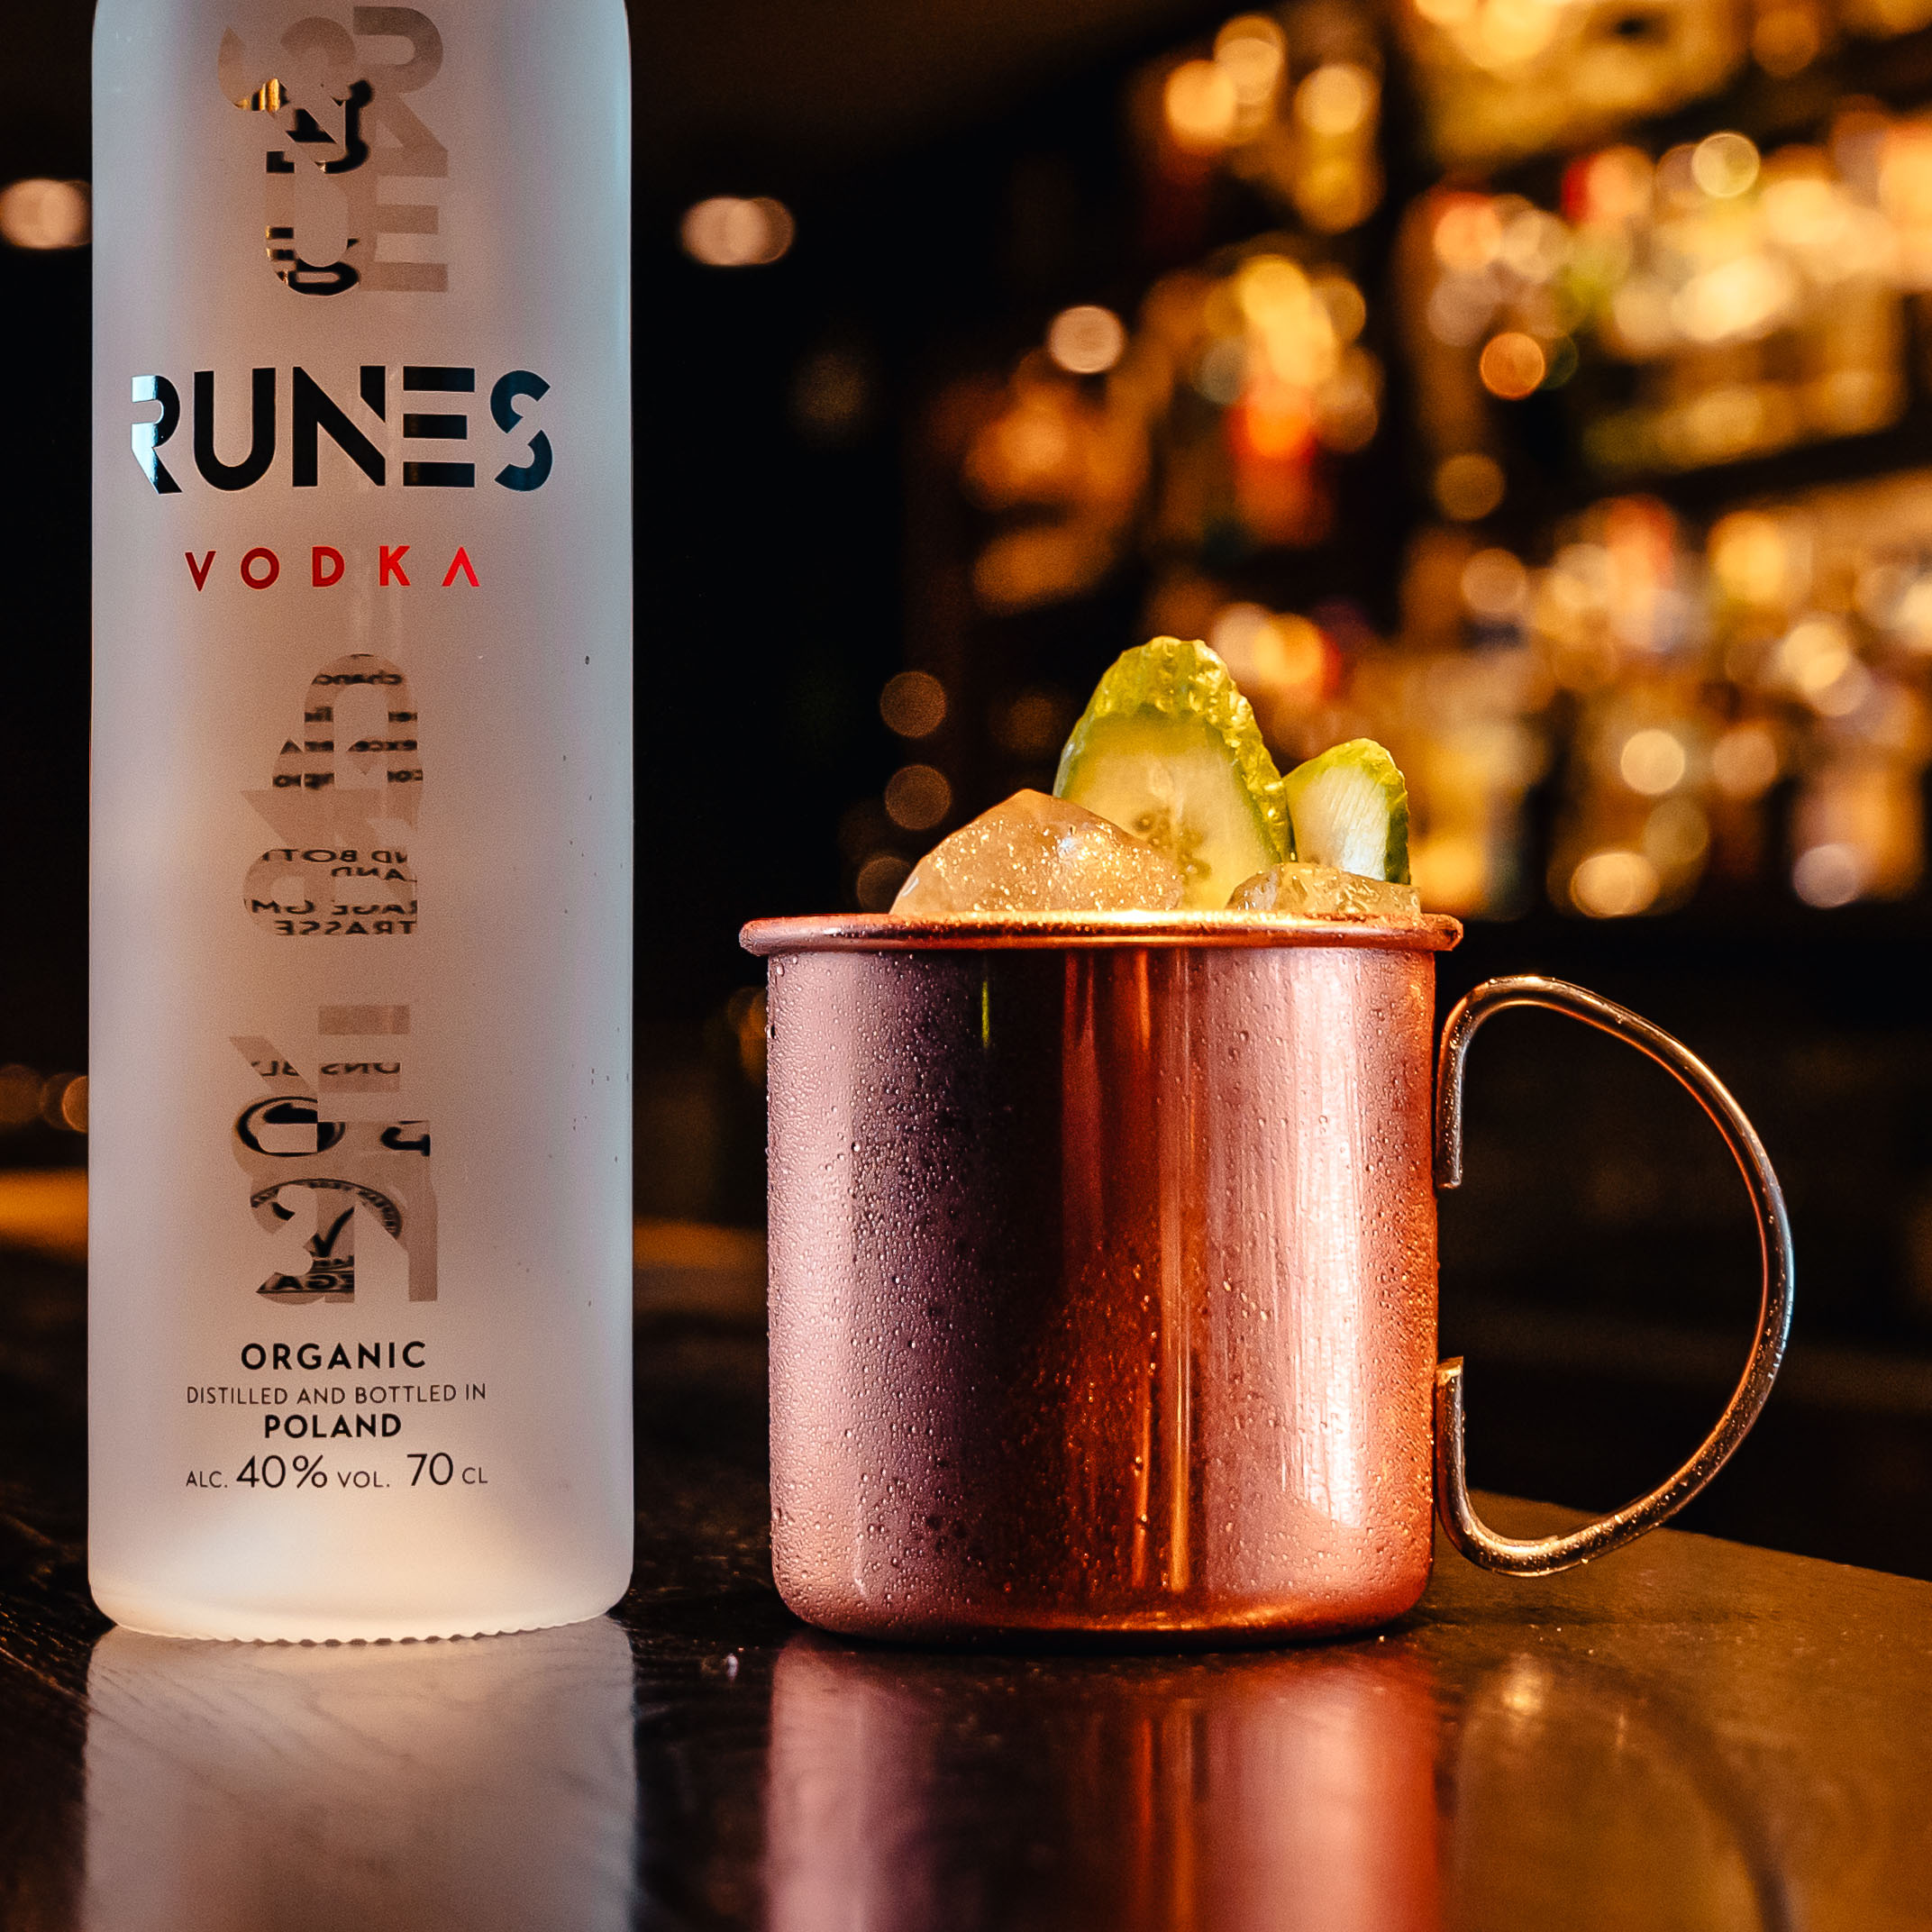 Moscow Mule Drink with RUNES